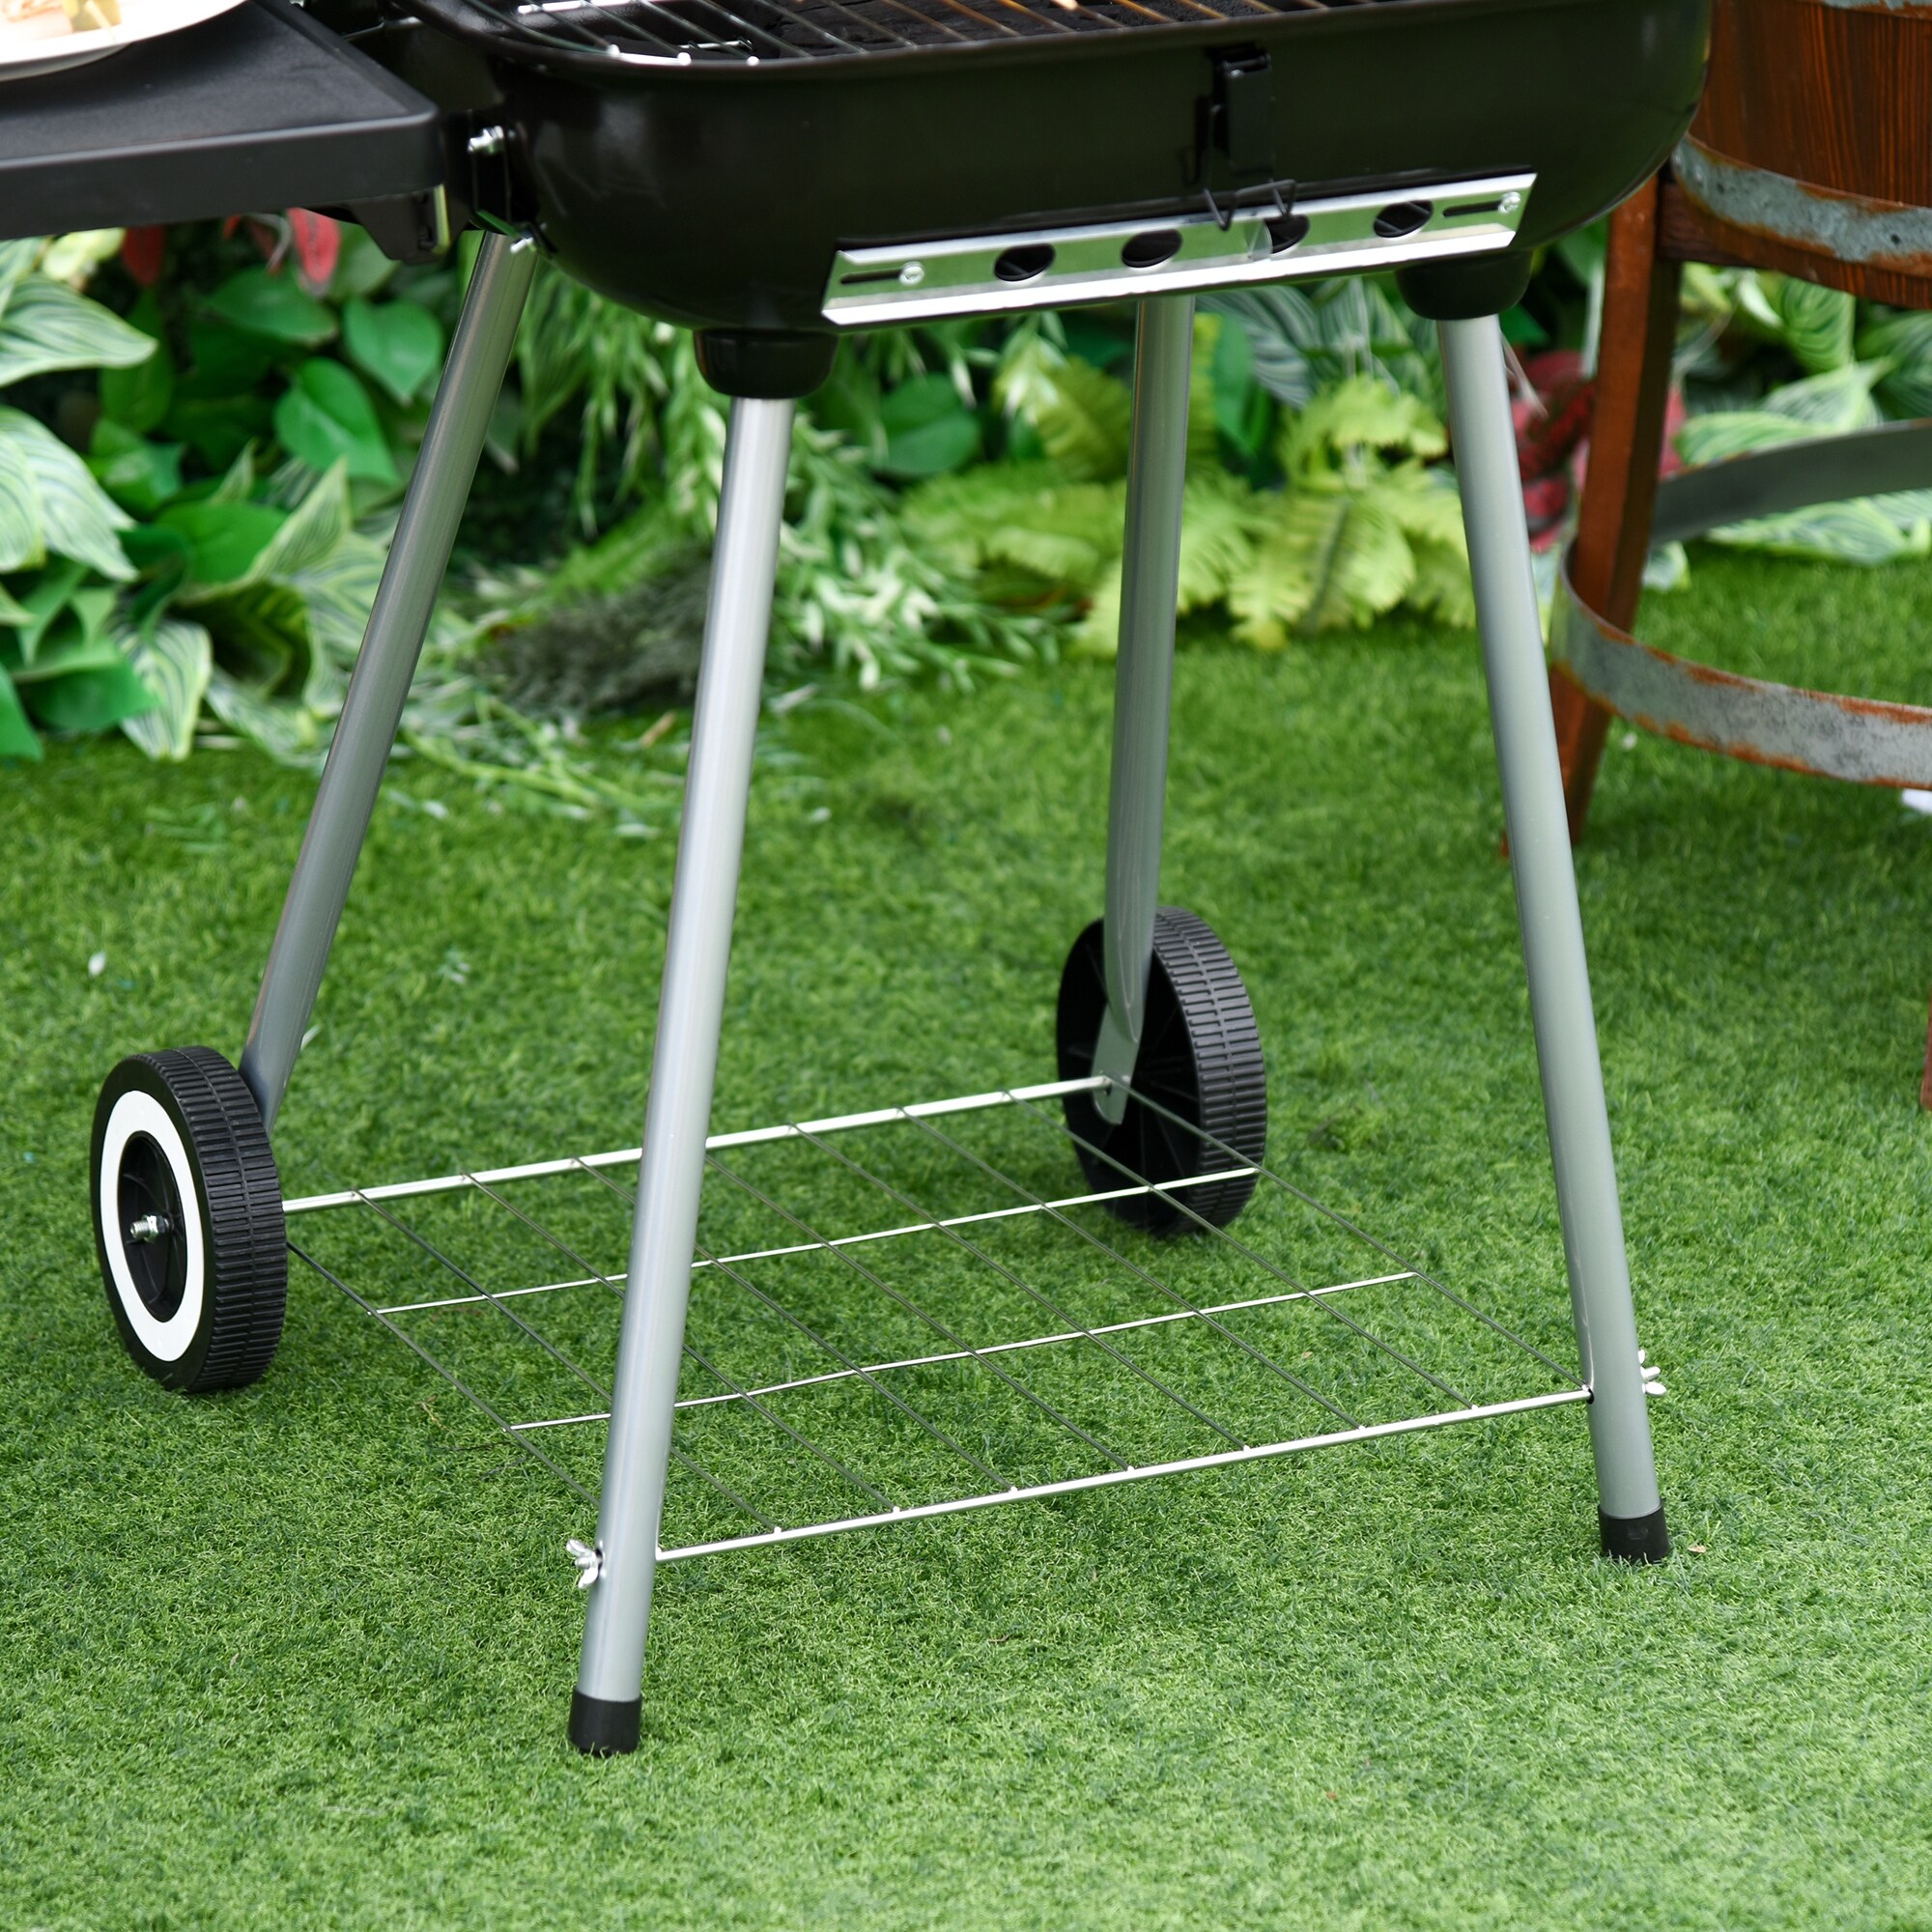 https://ak1.ostkcdn.com/images/products/is/images/direct/18fc5eabbed24fee8a6d3013e0e0ad621371fb26/Outsunny-Steel-Portable-Outdoor-Charcoal-Barbecue-Grill.jpg